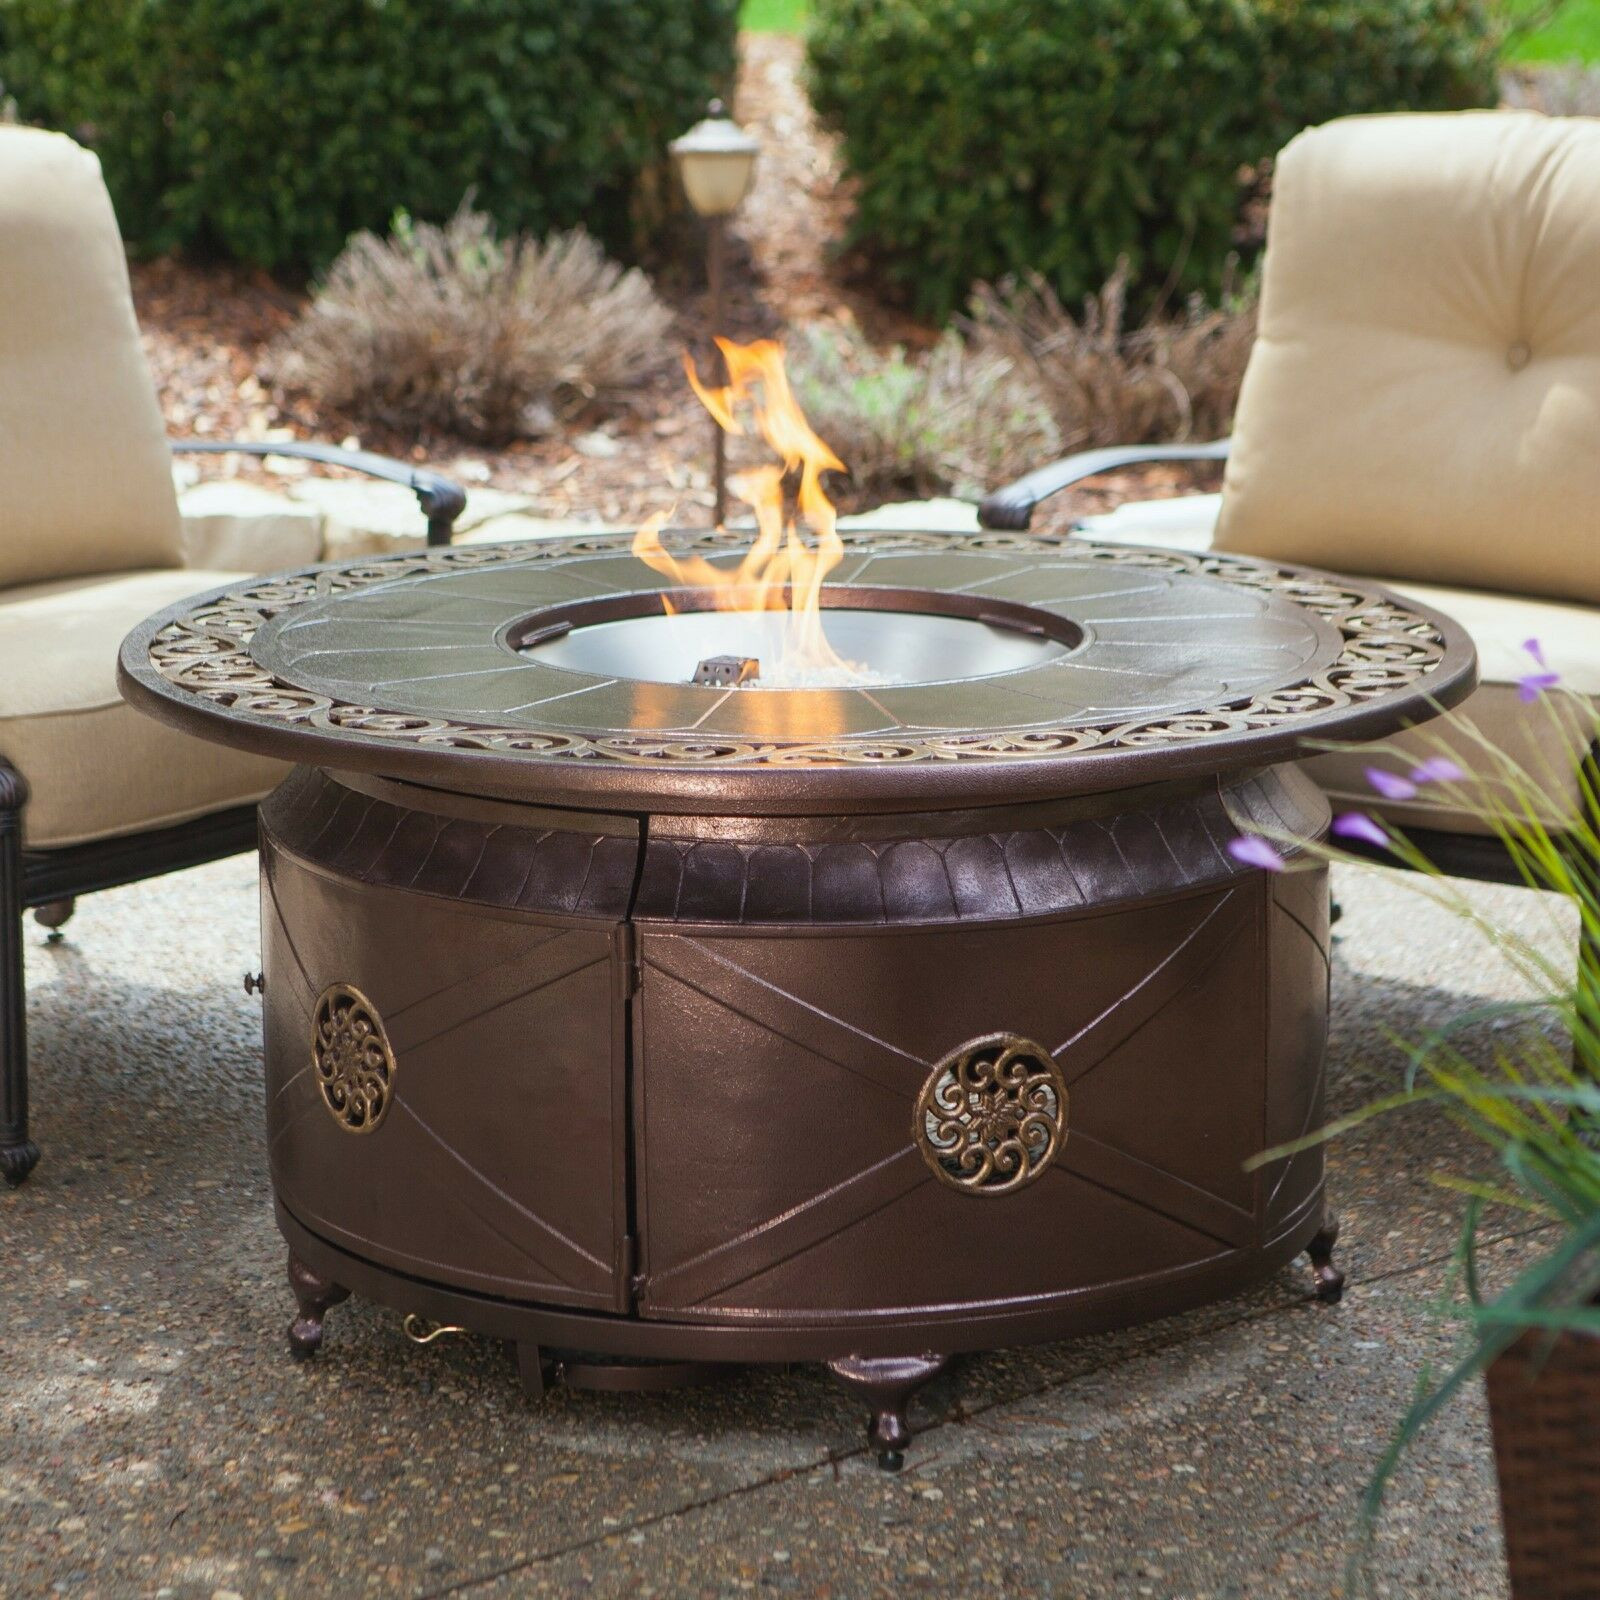 Patio Tables With Fire Pits
 Fire Pit Table Burner Patio Deck Outdoor Fireplace Propane